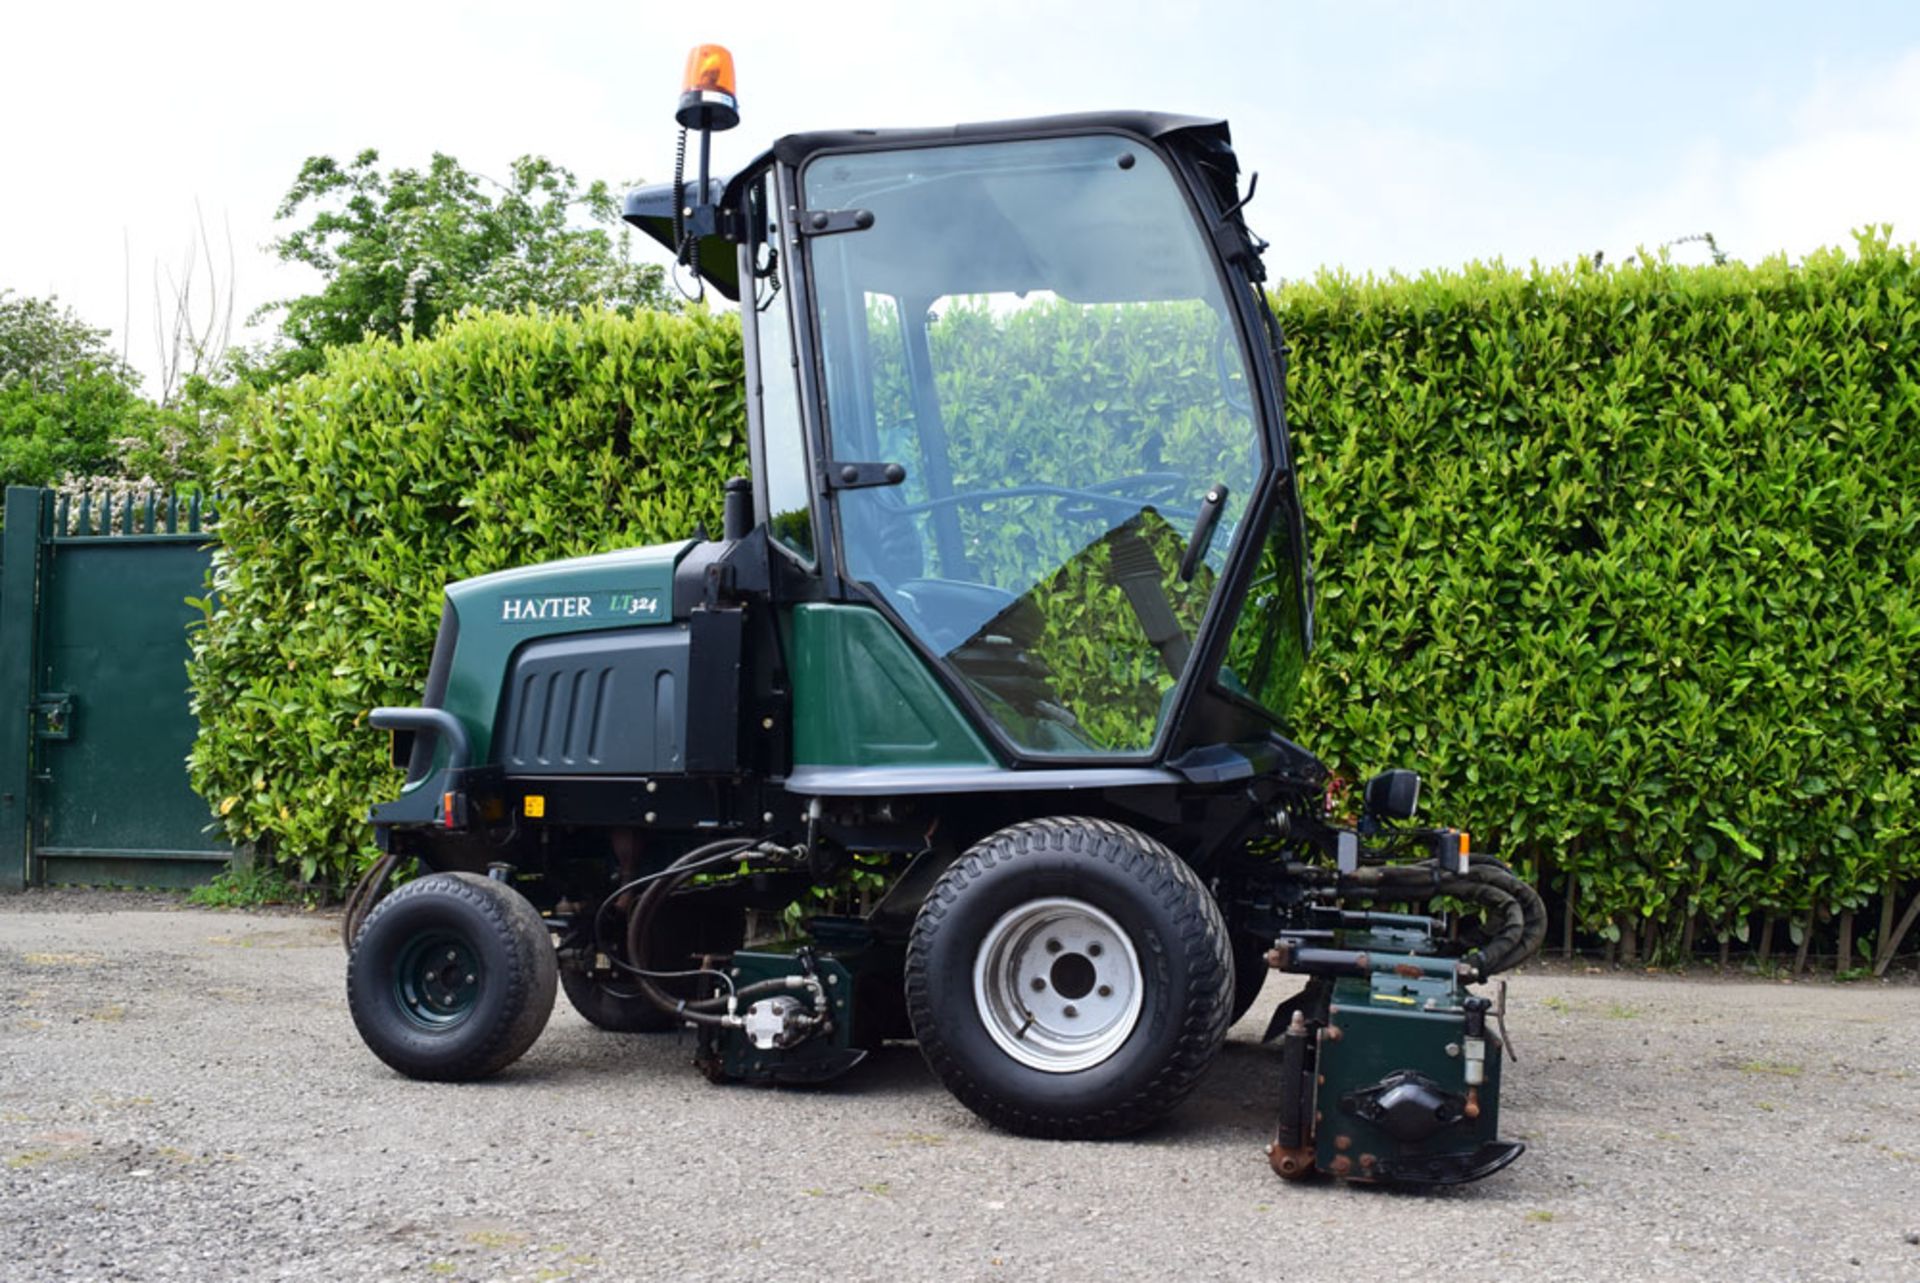 2010 Hayter LT324 Triple Cylinder Mower With Cab - Image 2 of 5